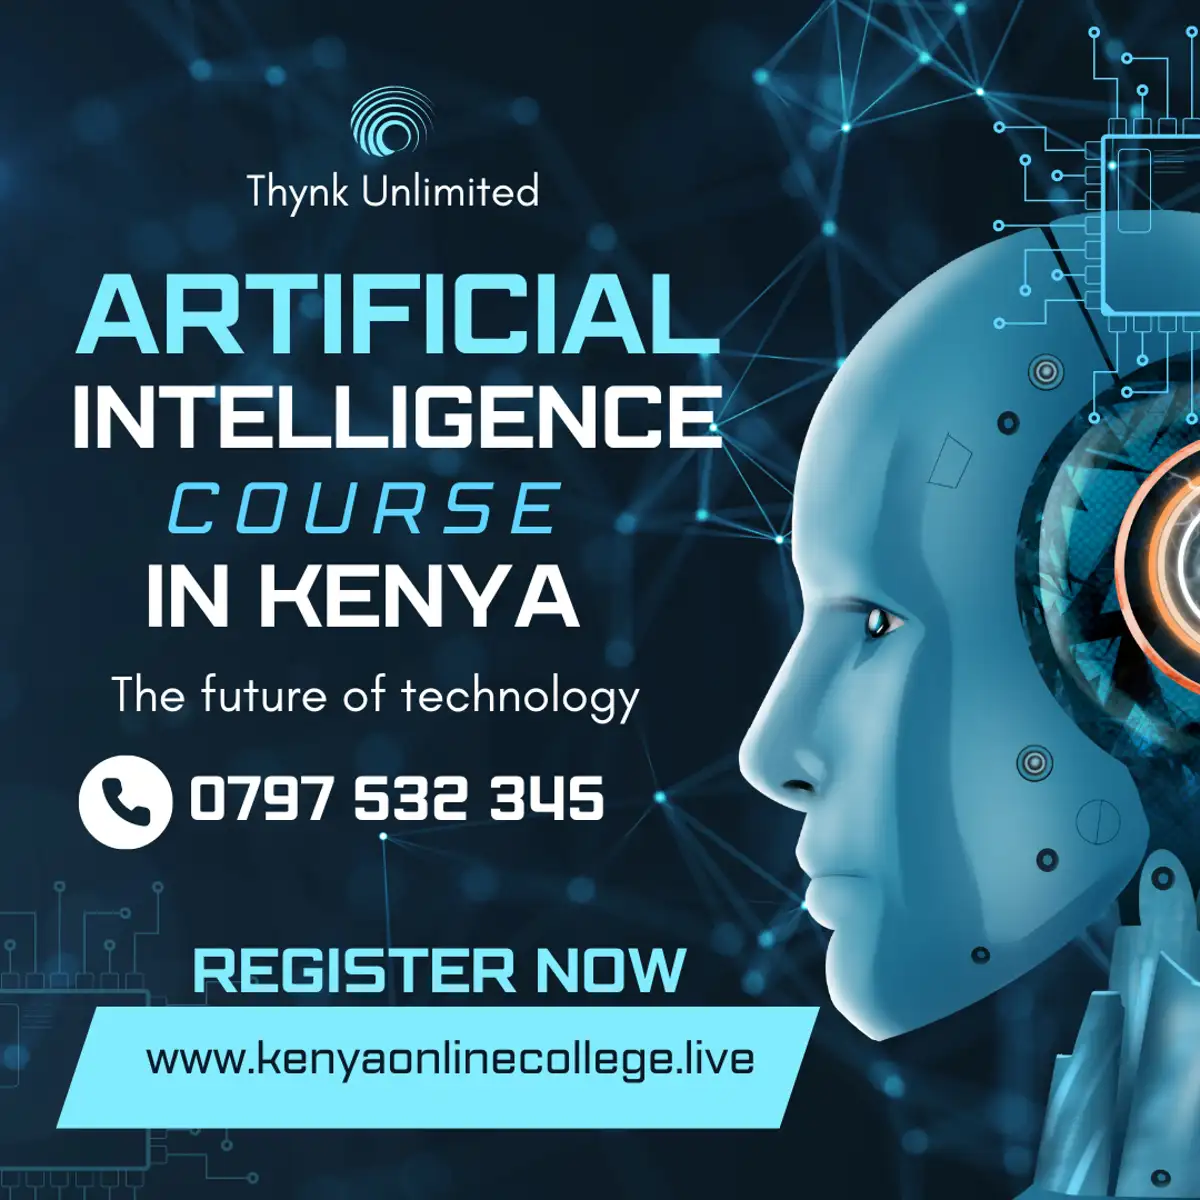 Artificial intelligence course in Kenya